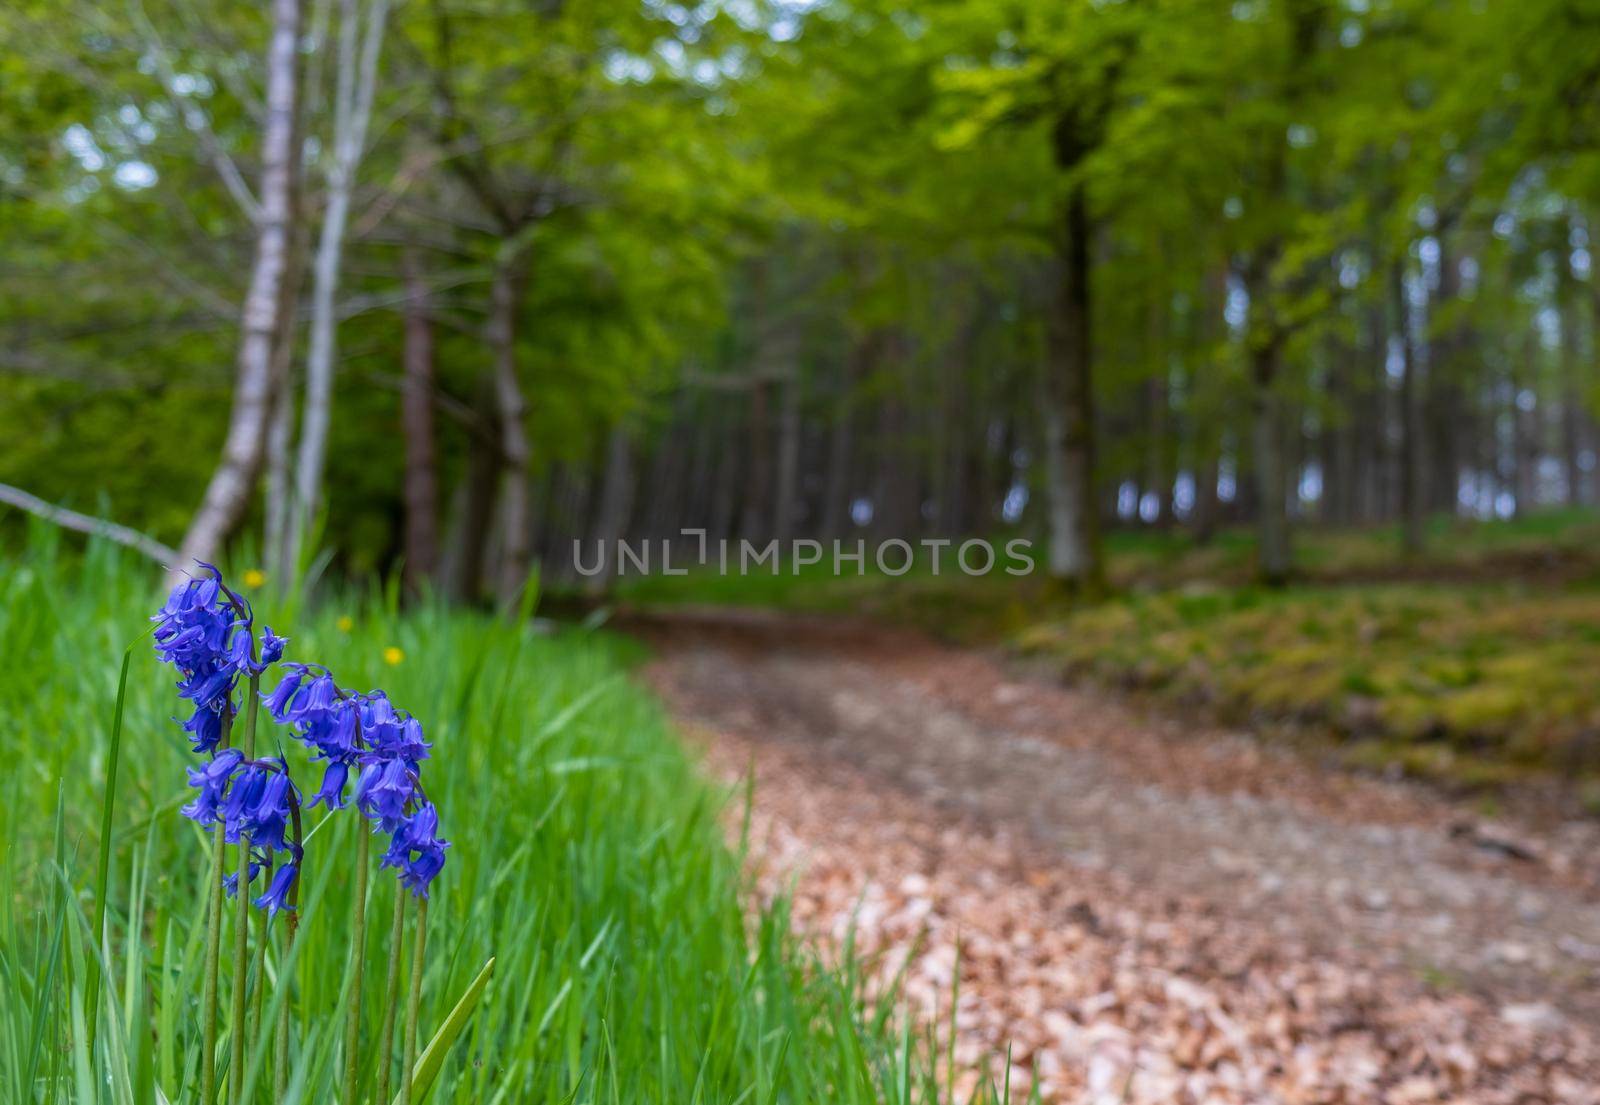 Tranquil Forest Scene Of Bluebell Flowers With A Trail Leading Off Into The Distance